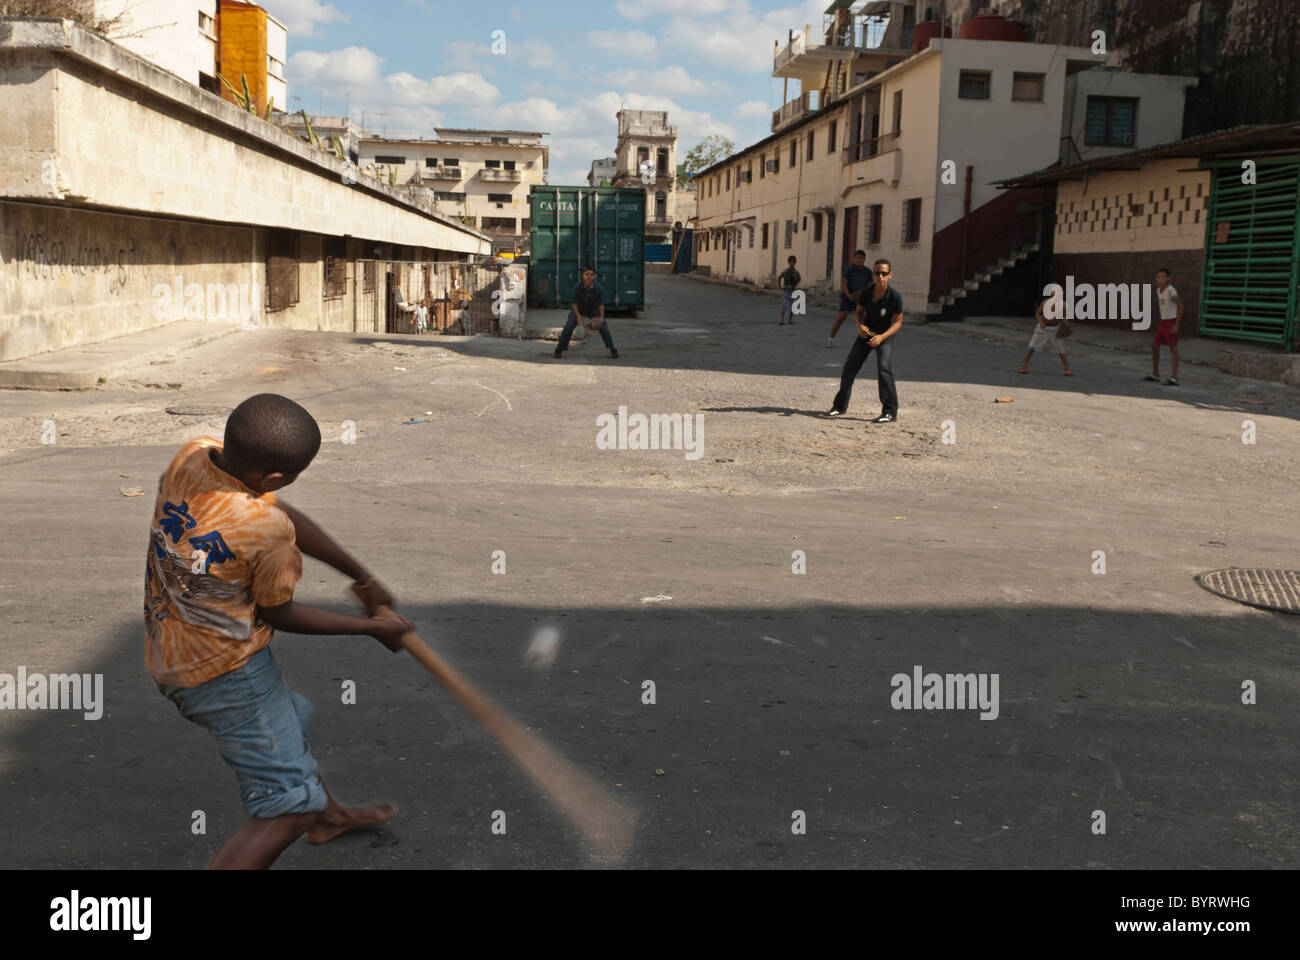 Printable Pictures Of Dominican Kids Playing Baseball In The Streets